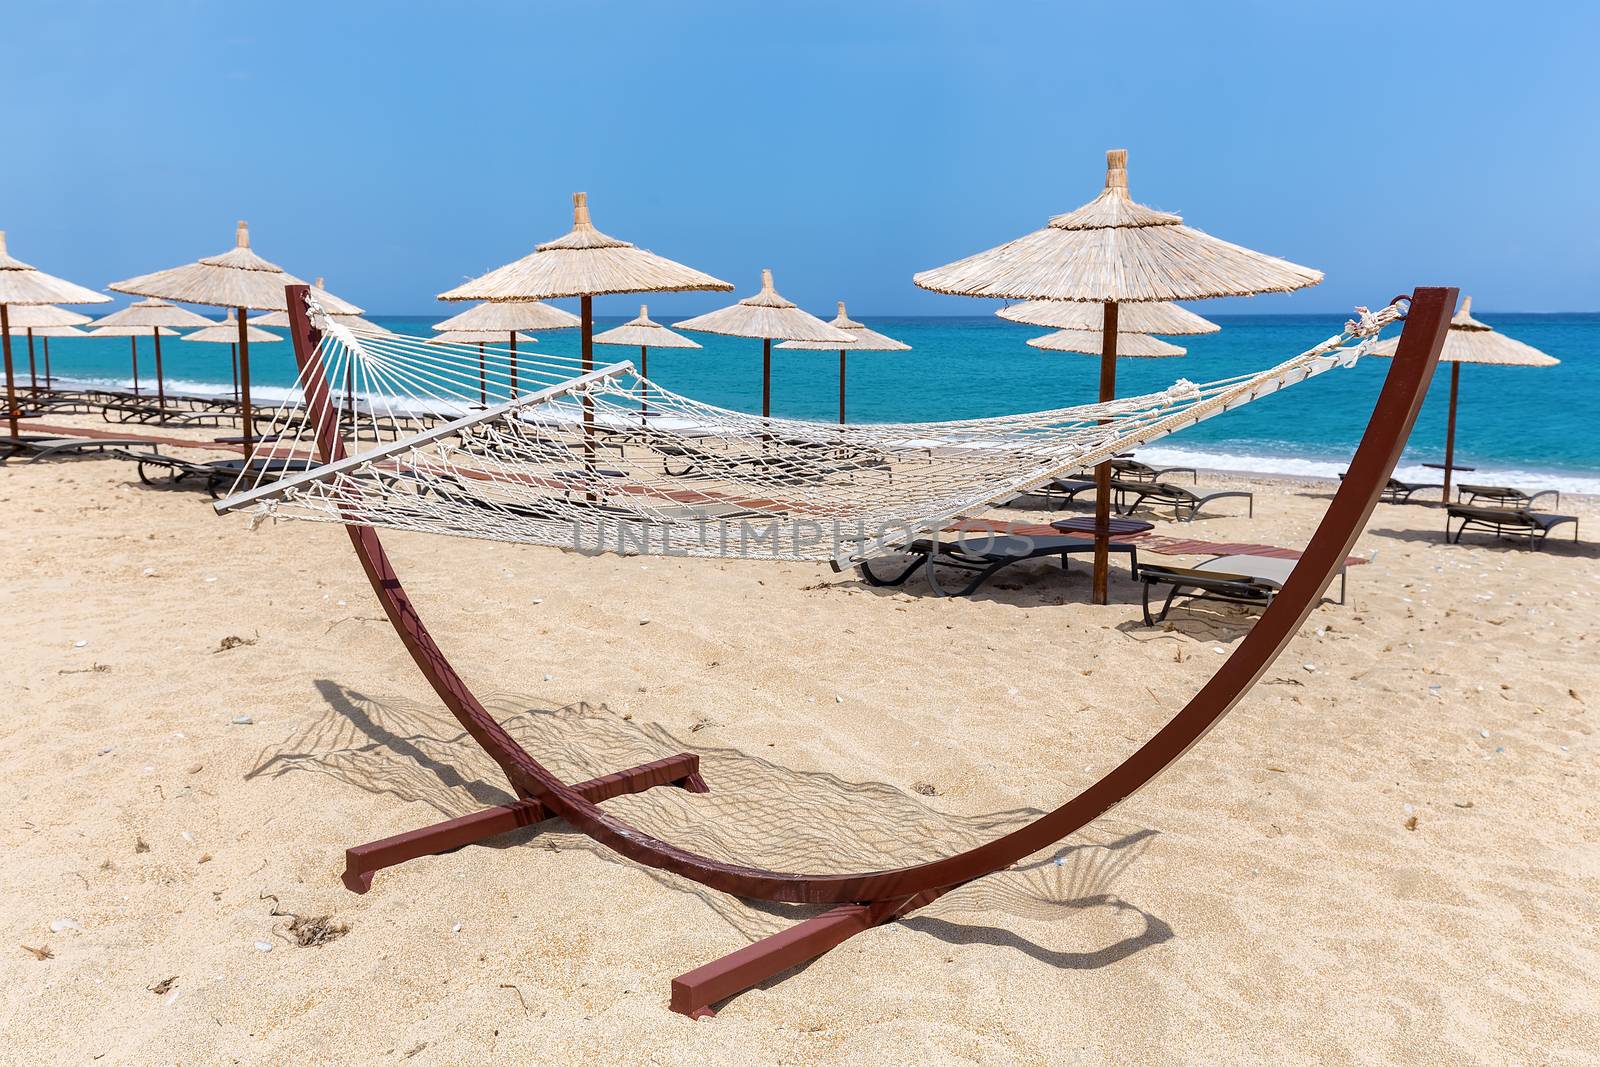 Hammock with beach umbrellas and loungers at greek coast with sea